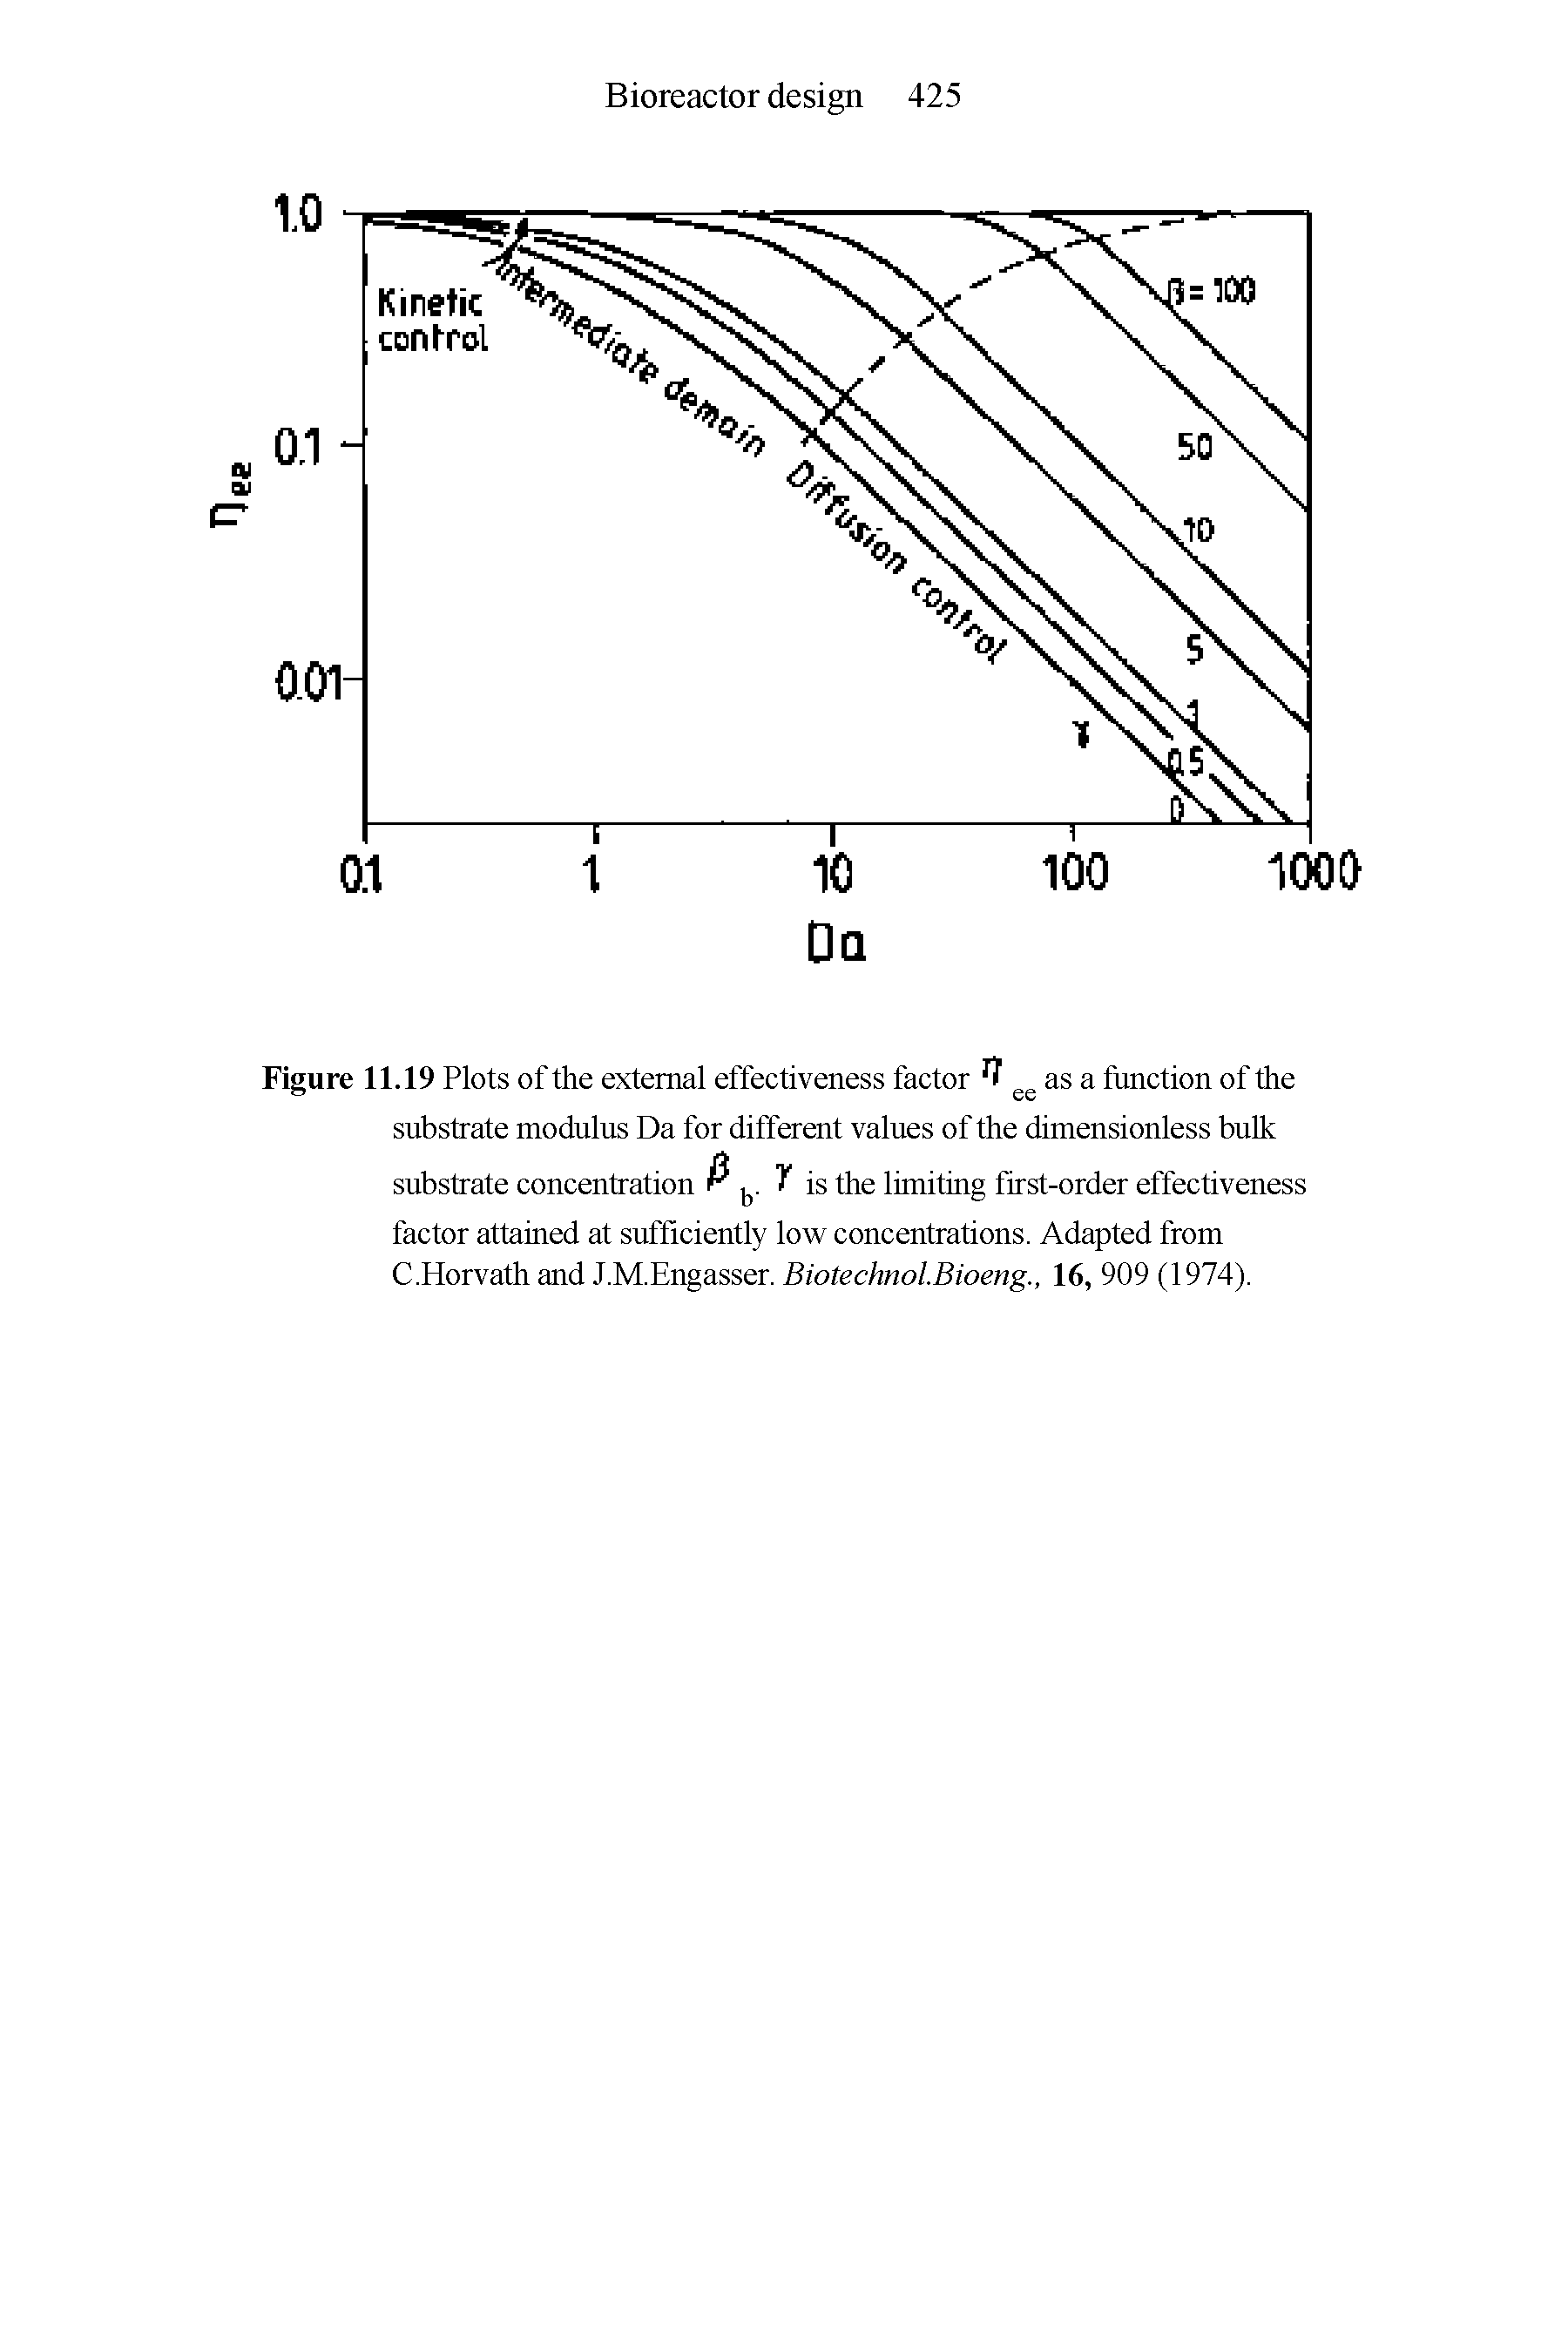 Figure 11.19 Plots of the external effectiveness factor as a function of the substrate modulus Da for different values of the dimensionless bulk substrate concentration is the limiting first-order effectiveness factor attained at sufficiently low concentrations. Adapted from C.Horvath and J.M.Engasser. Biotechnol.Bioeng., 16, 909 (1974).